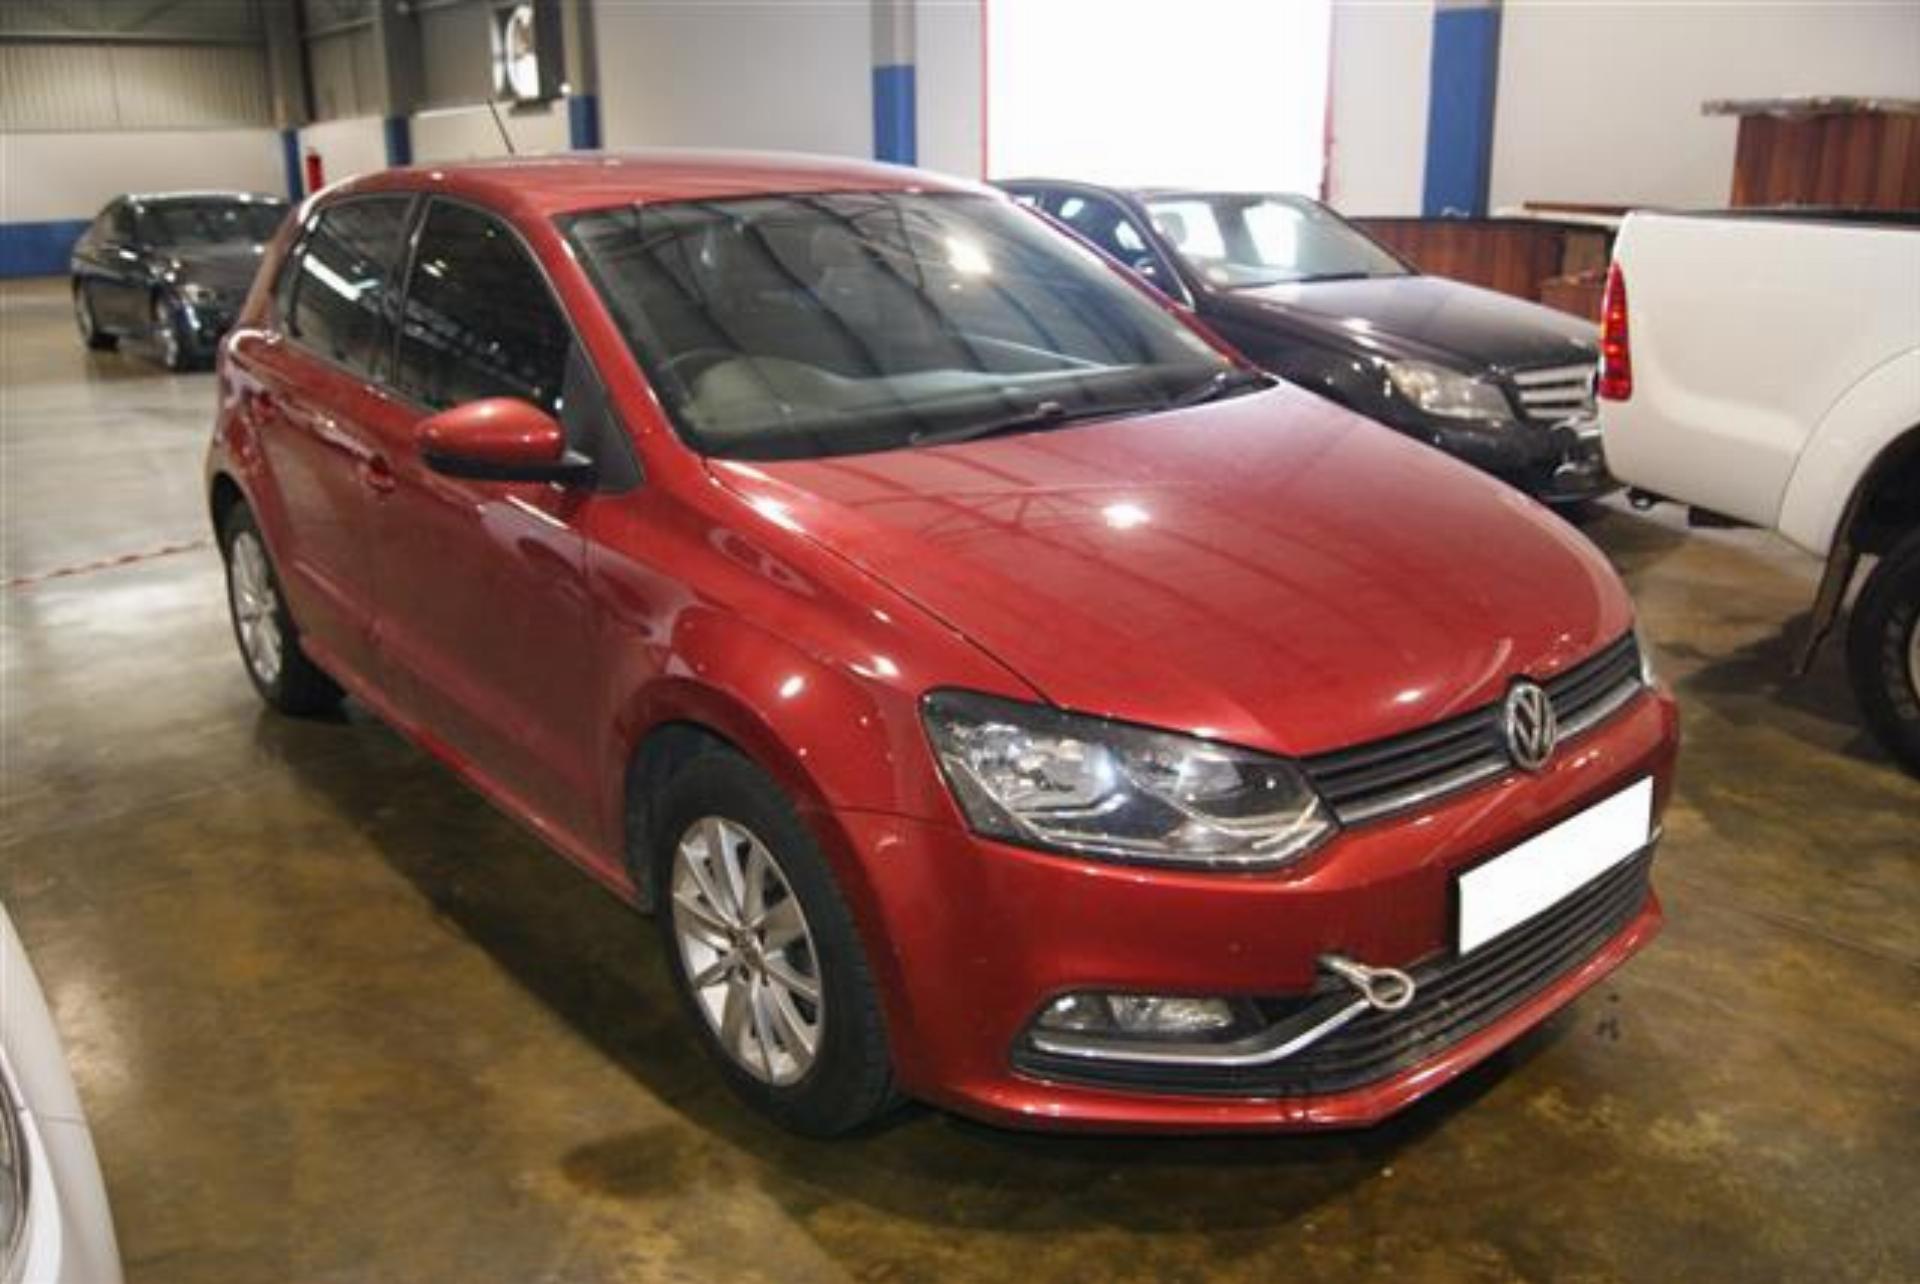 Repossessed VW Polo GP 1.2 Comfortline 2015 on auction